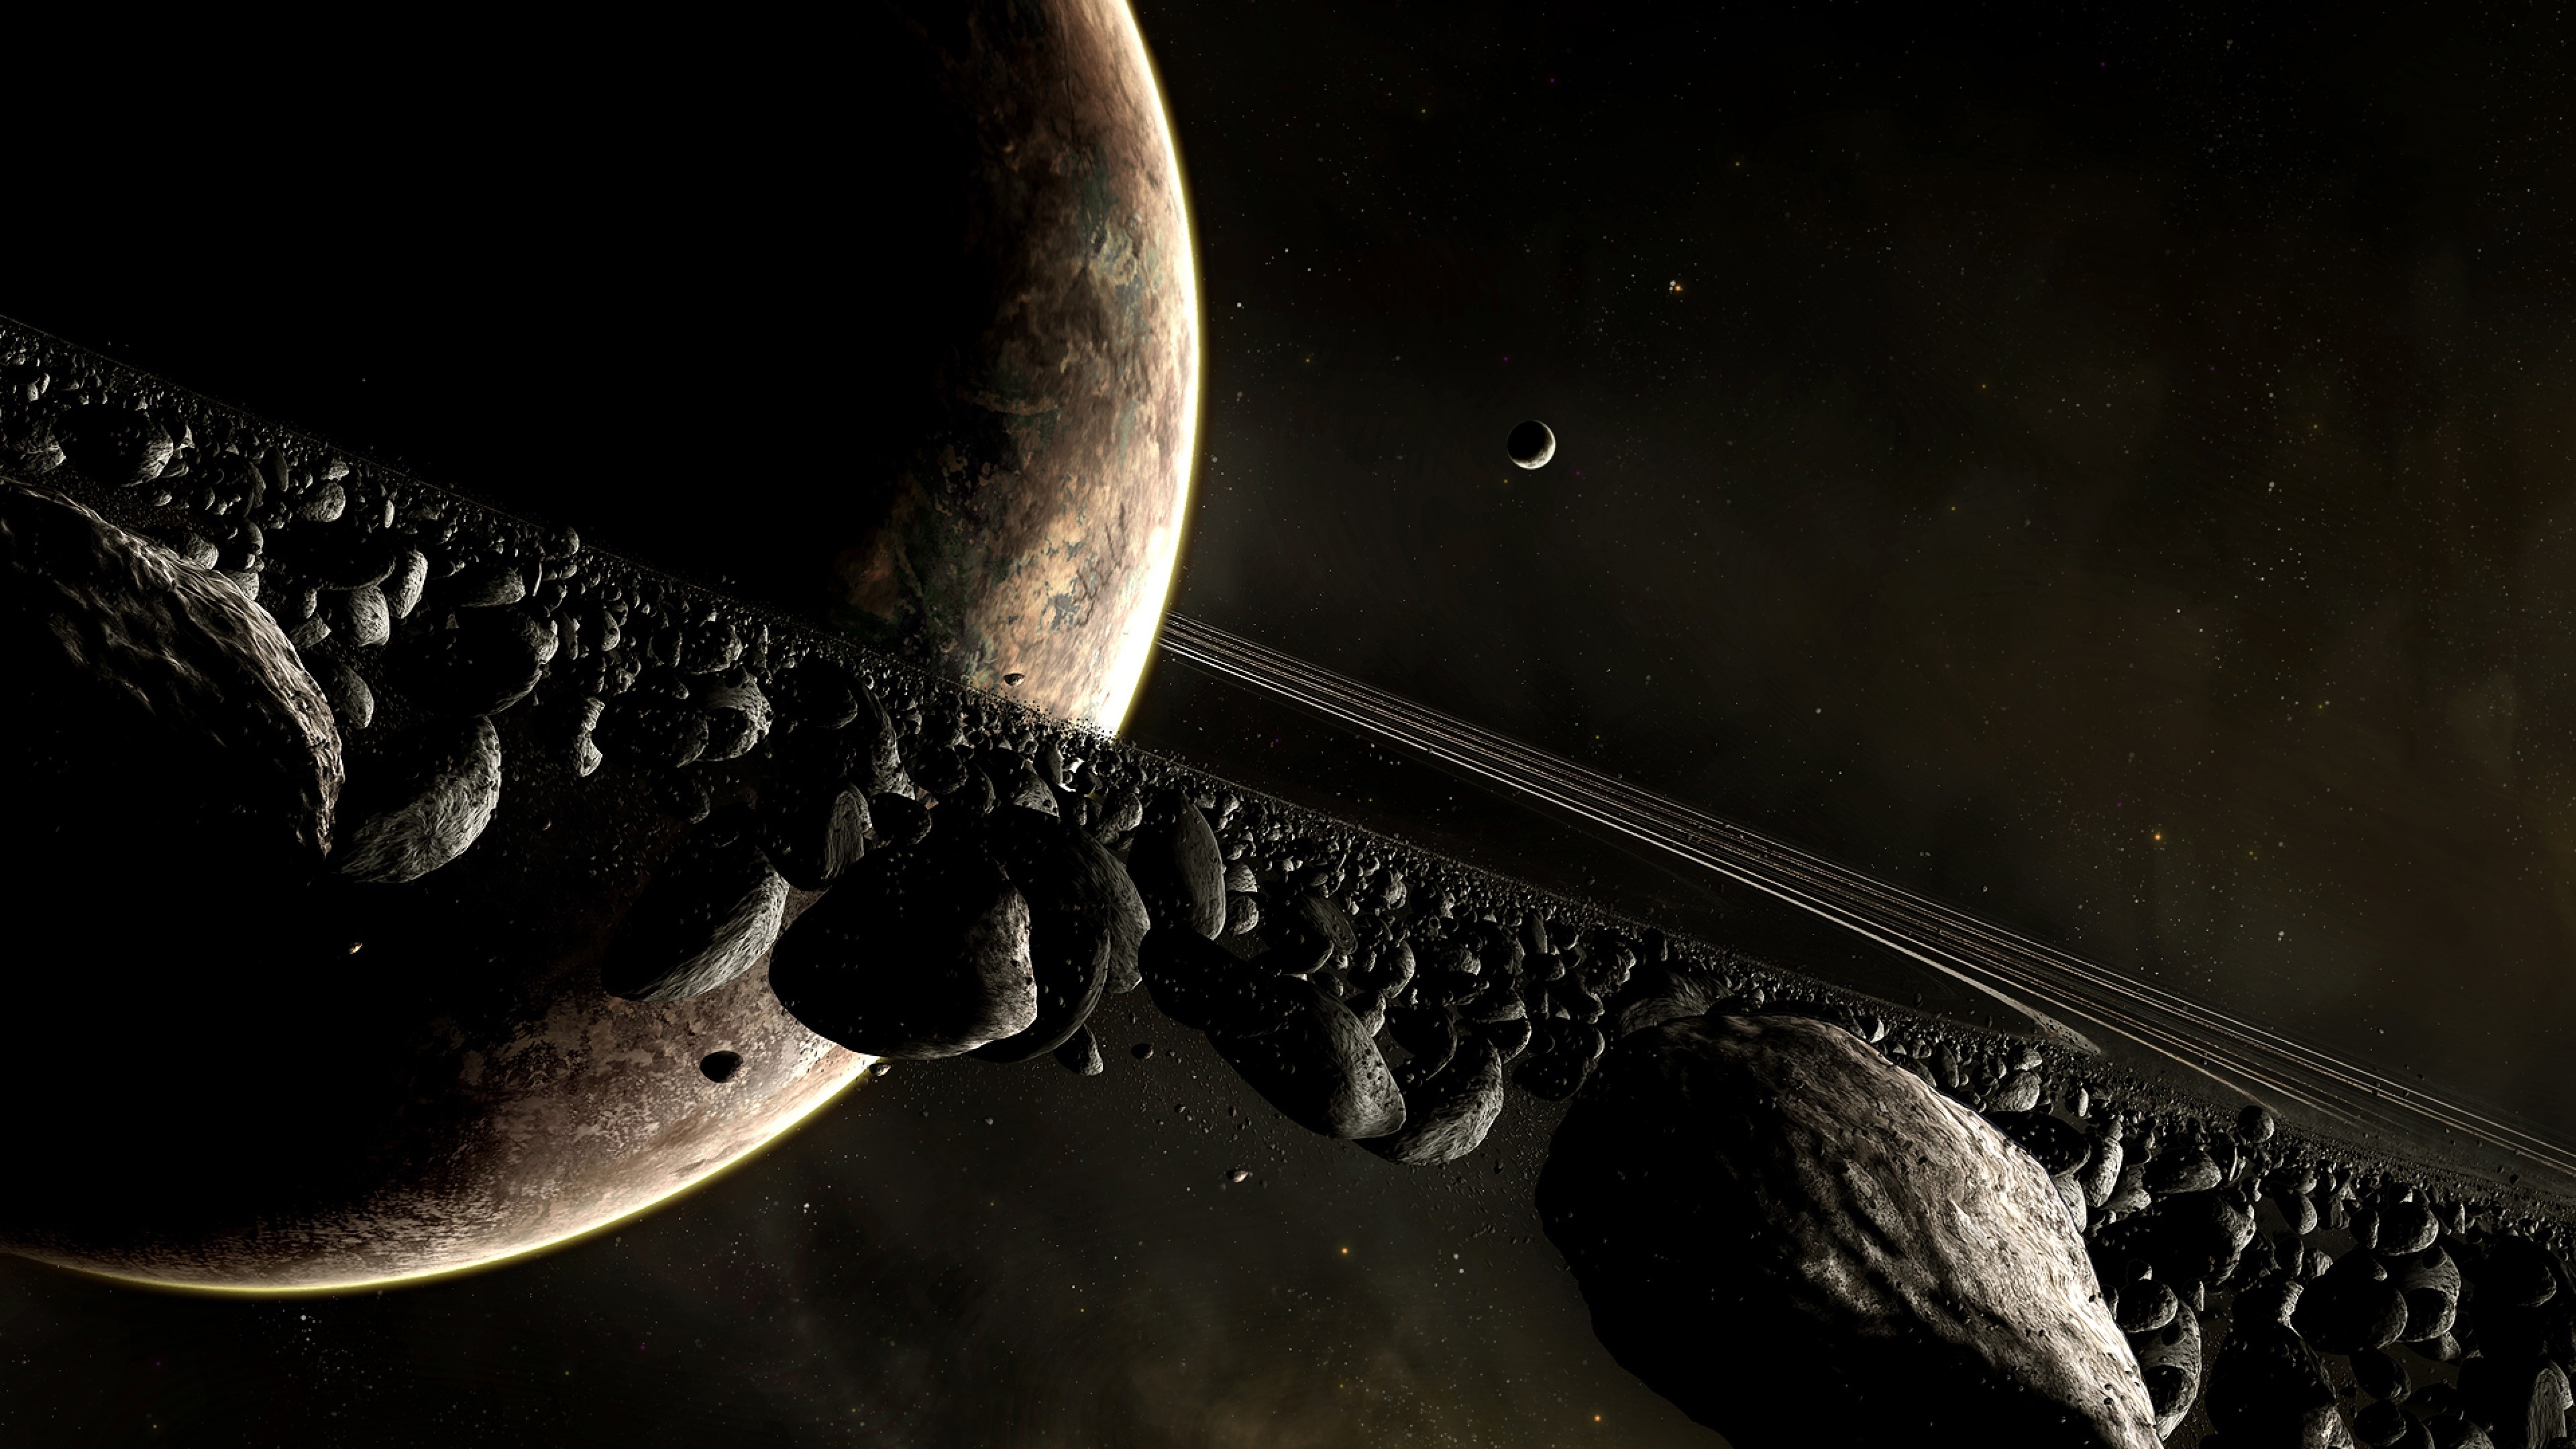 3840x2160  Wallpaper universe planet, planet, disaster, space